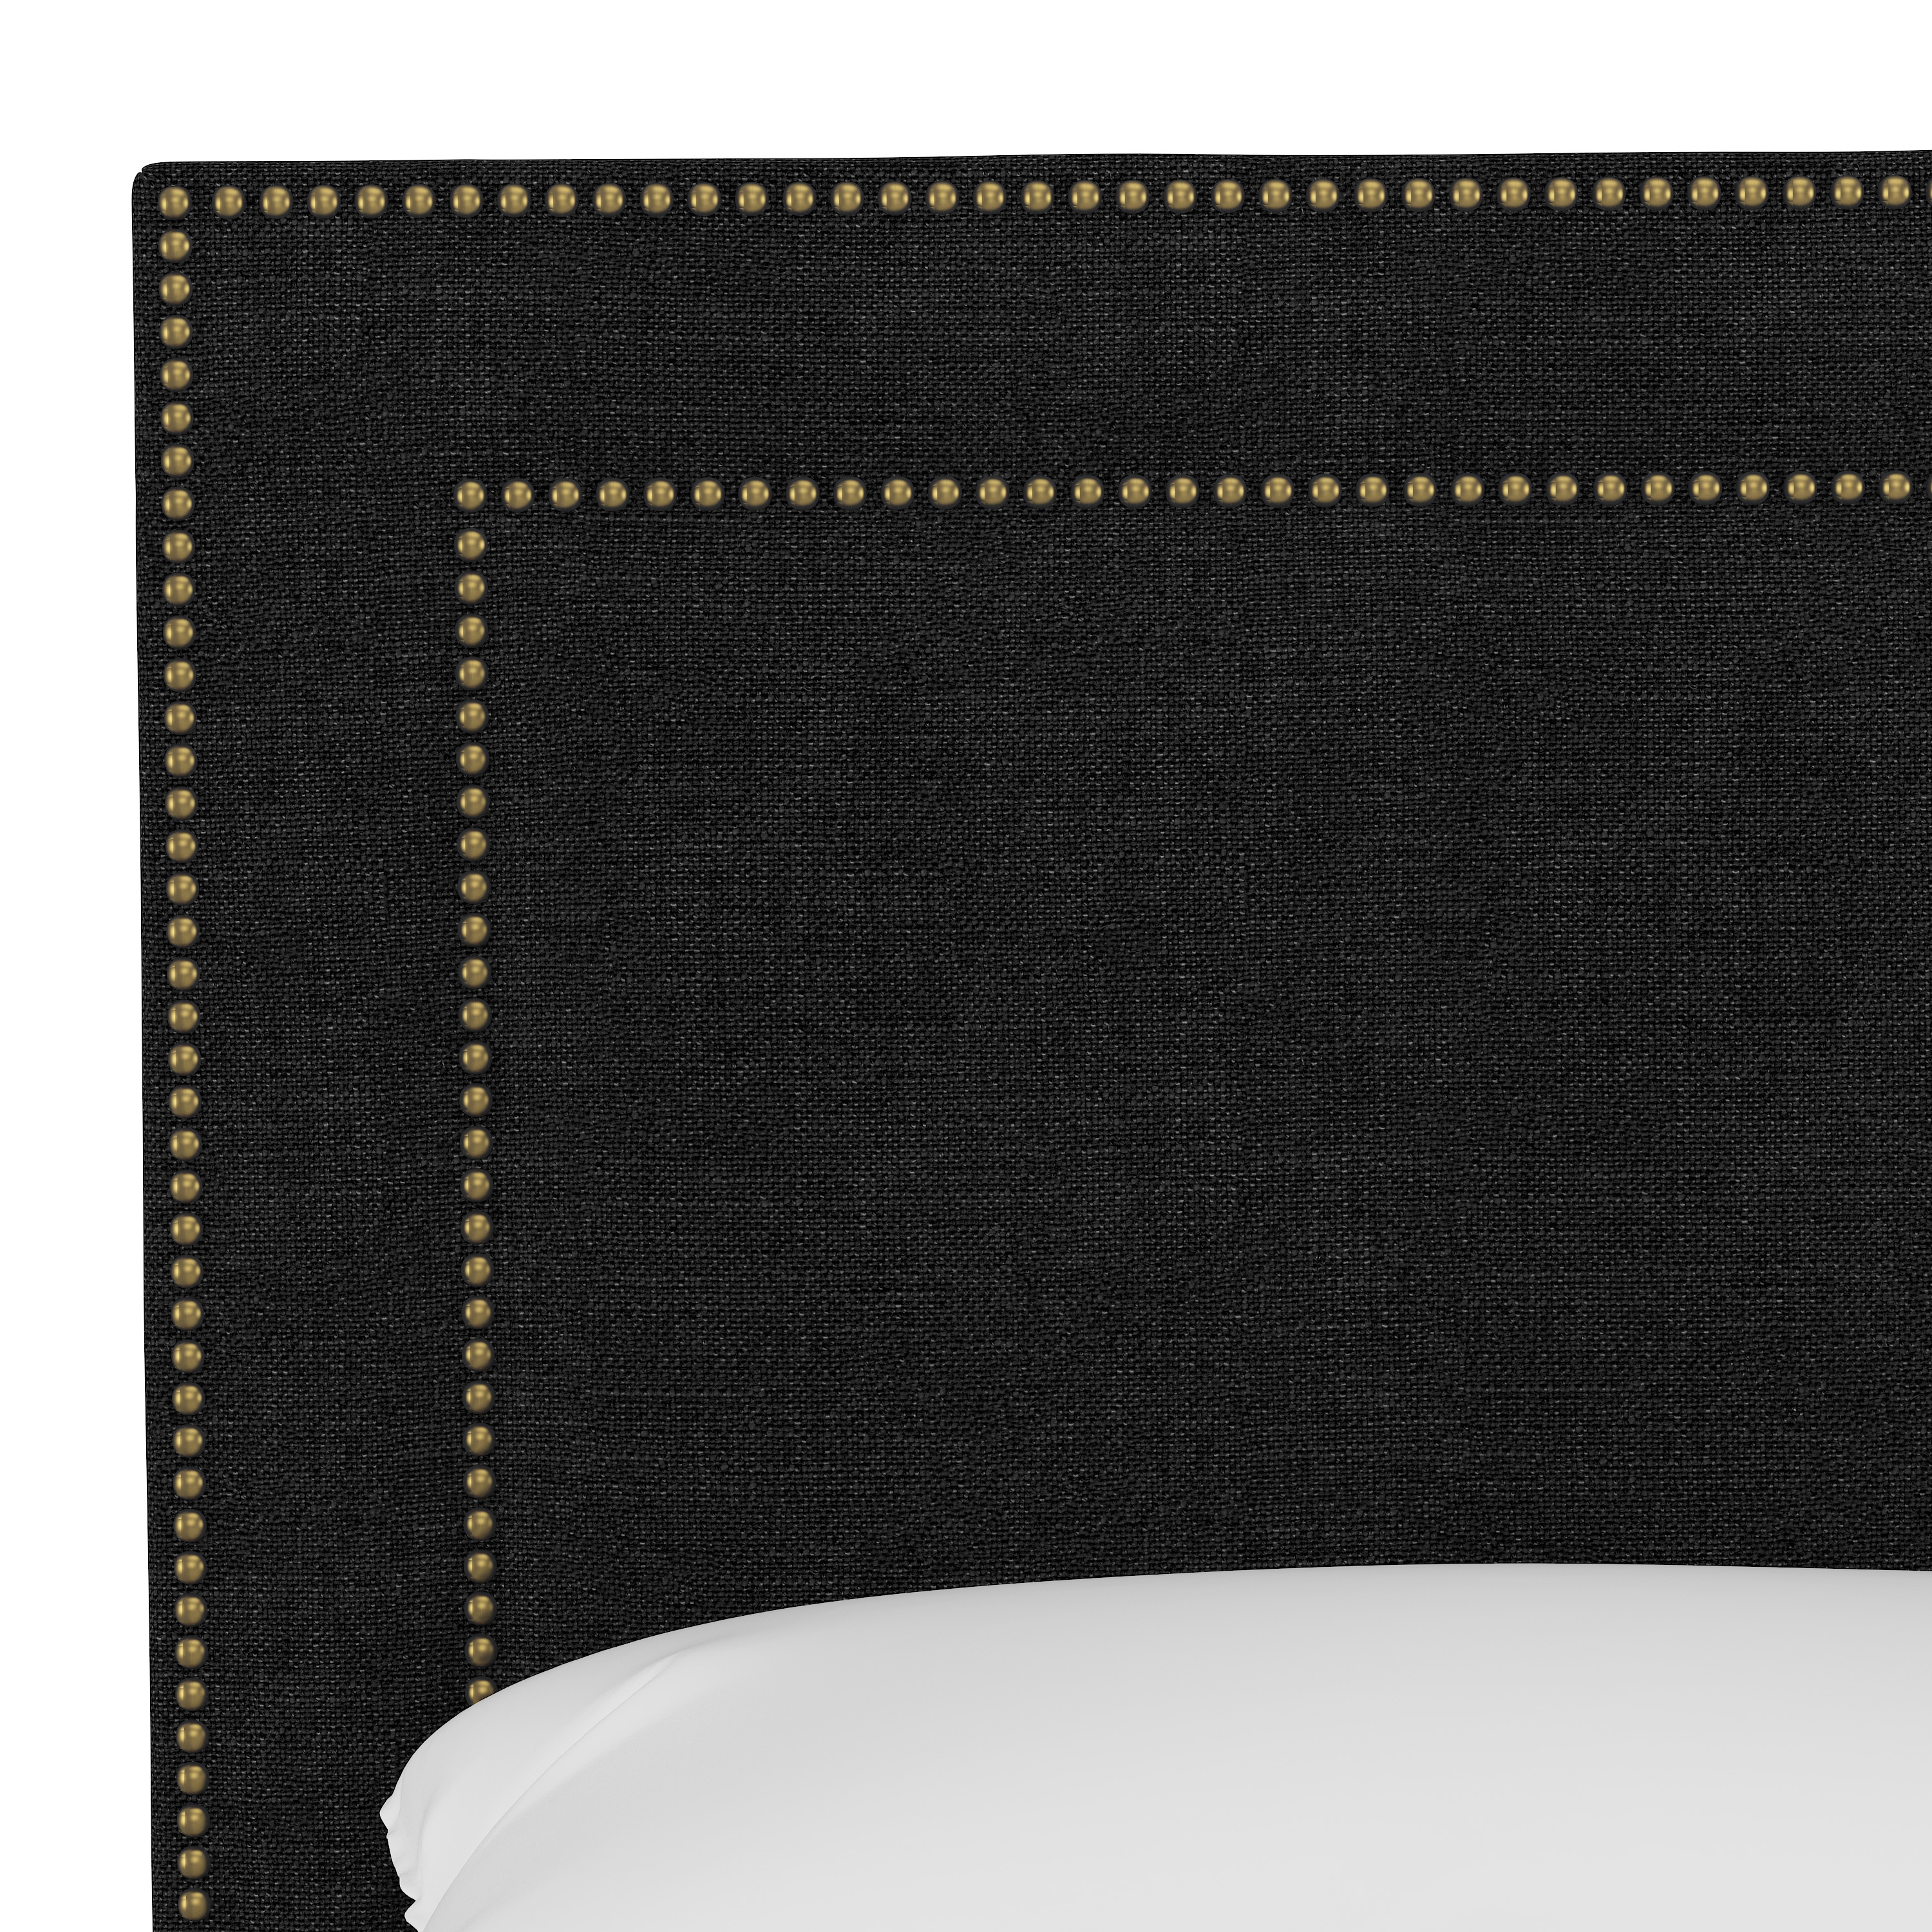 Williams Bed, Queen, Caviar, Brass Nailheads - Image 3